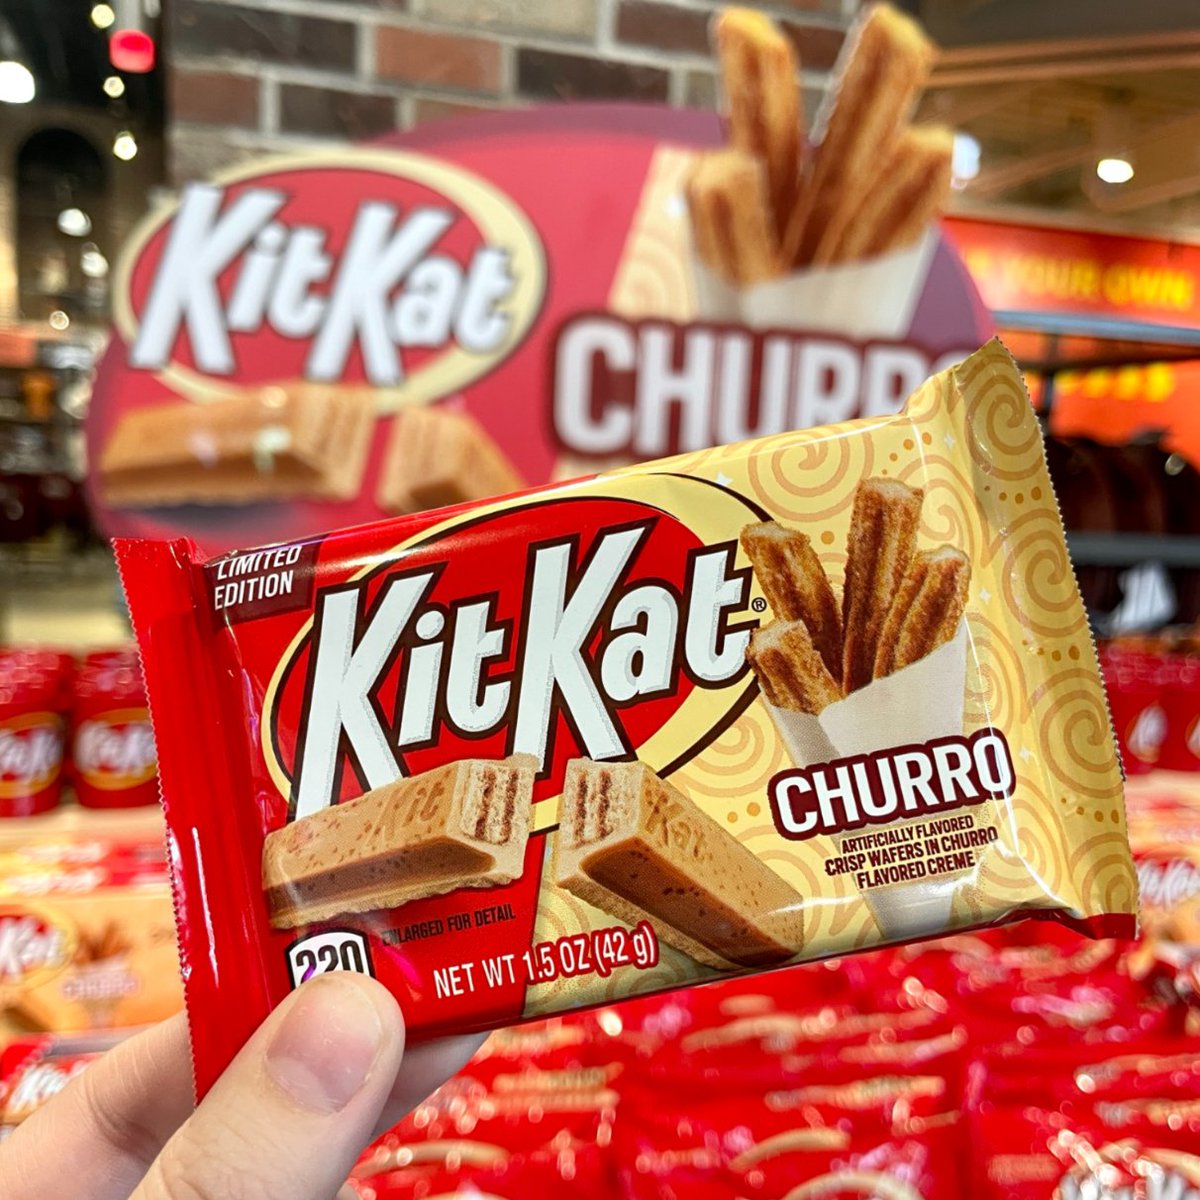 Our NEW KIT KAT CHURRO flavored crème bar has inspired some of our newest treats!